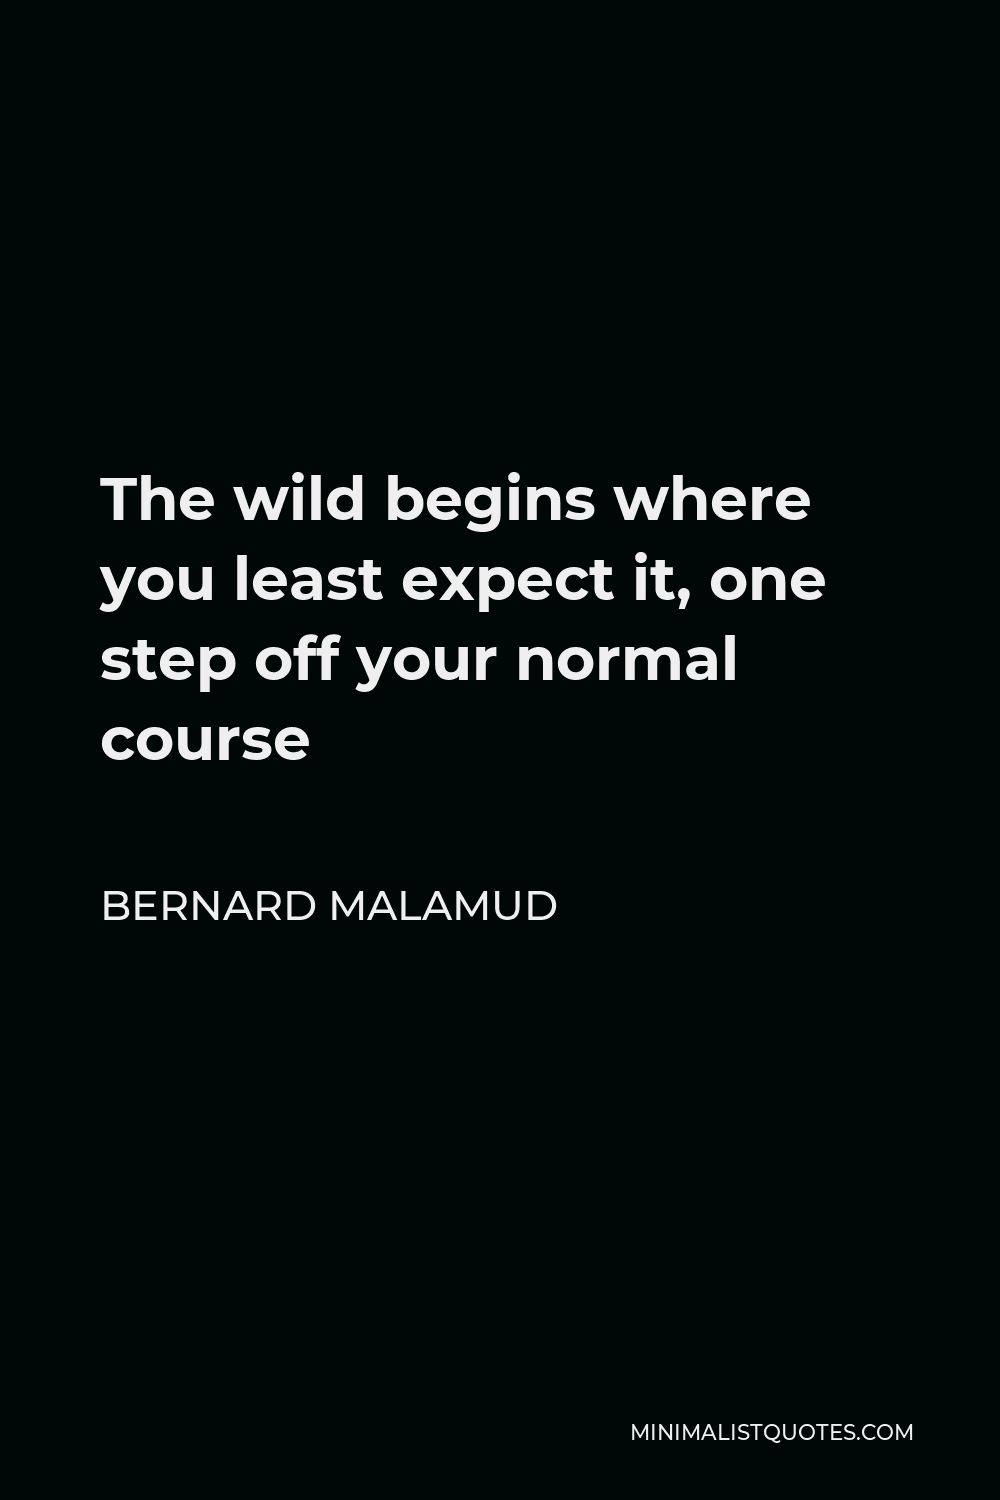 Bernard Malamud Quote - The wild begins where you least expect it, one step off your normal course